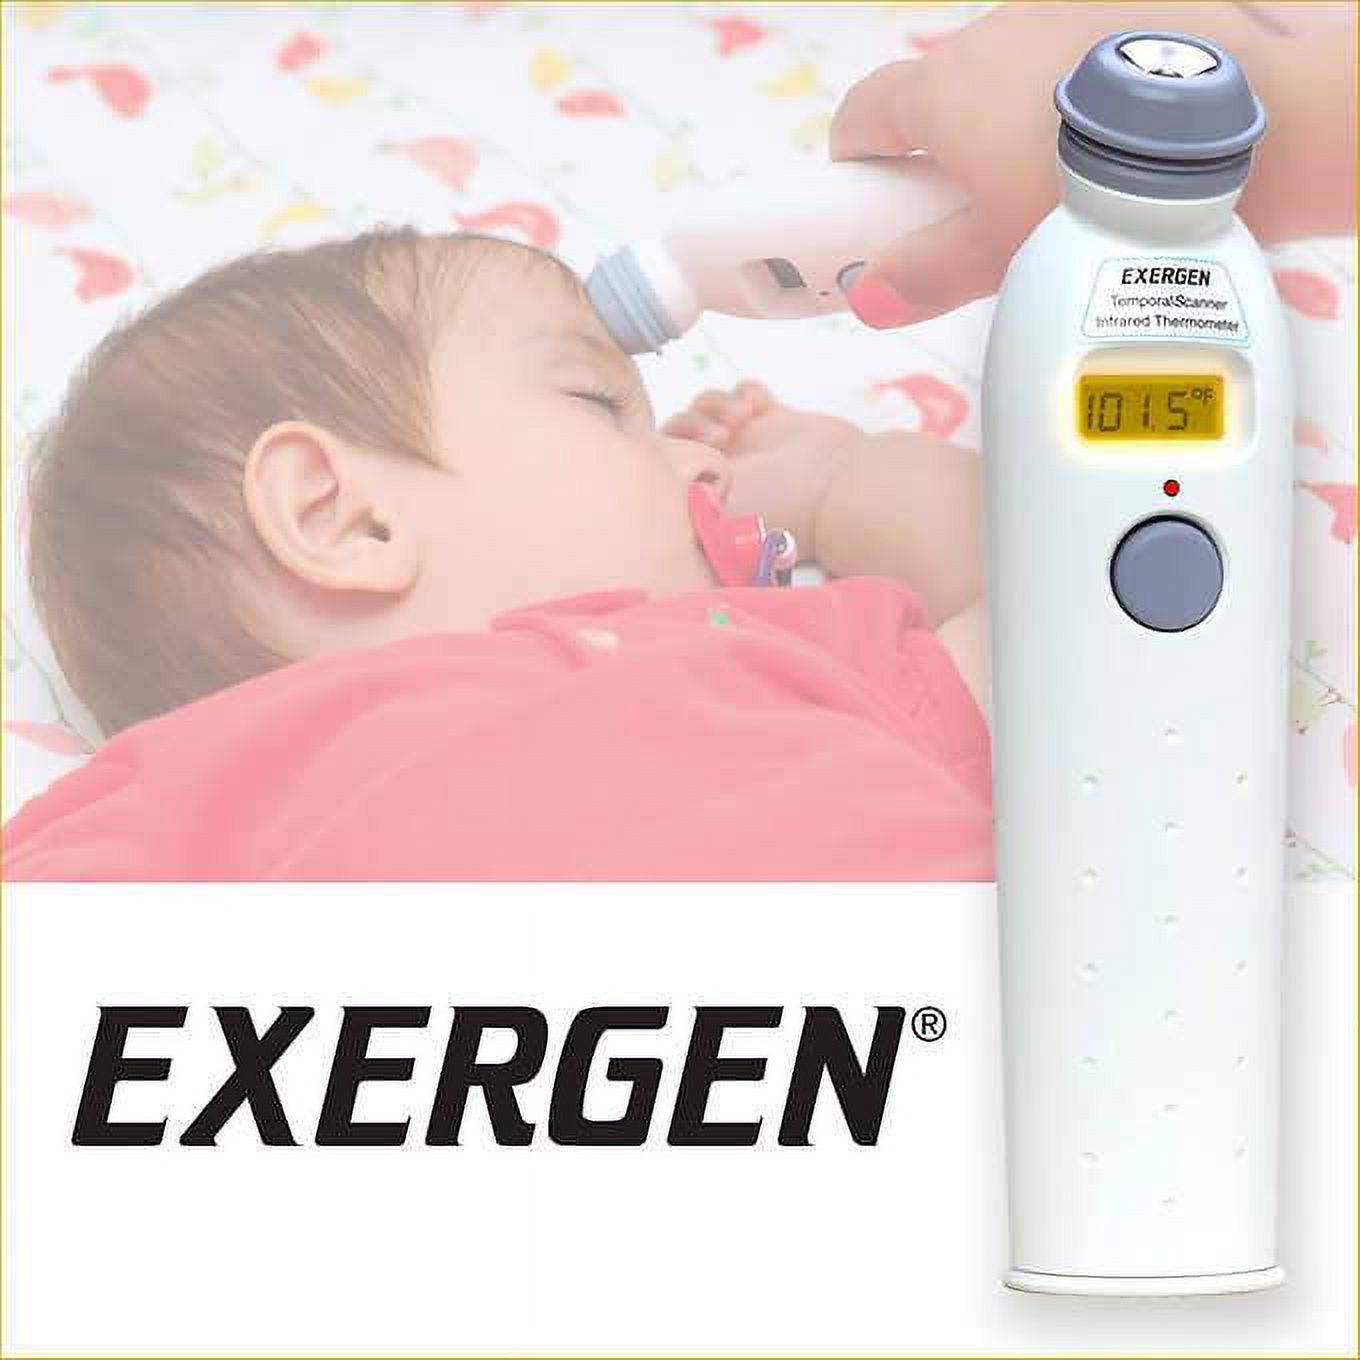 Exergen Smart Glow Temporal Artery Thermometer - image 3 of 5